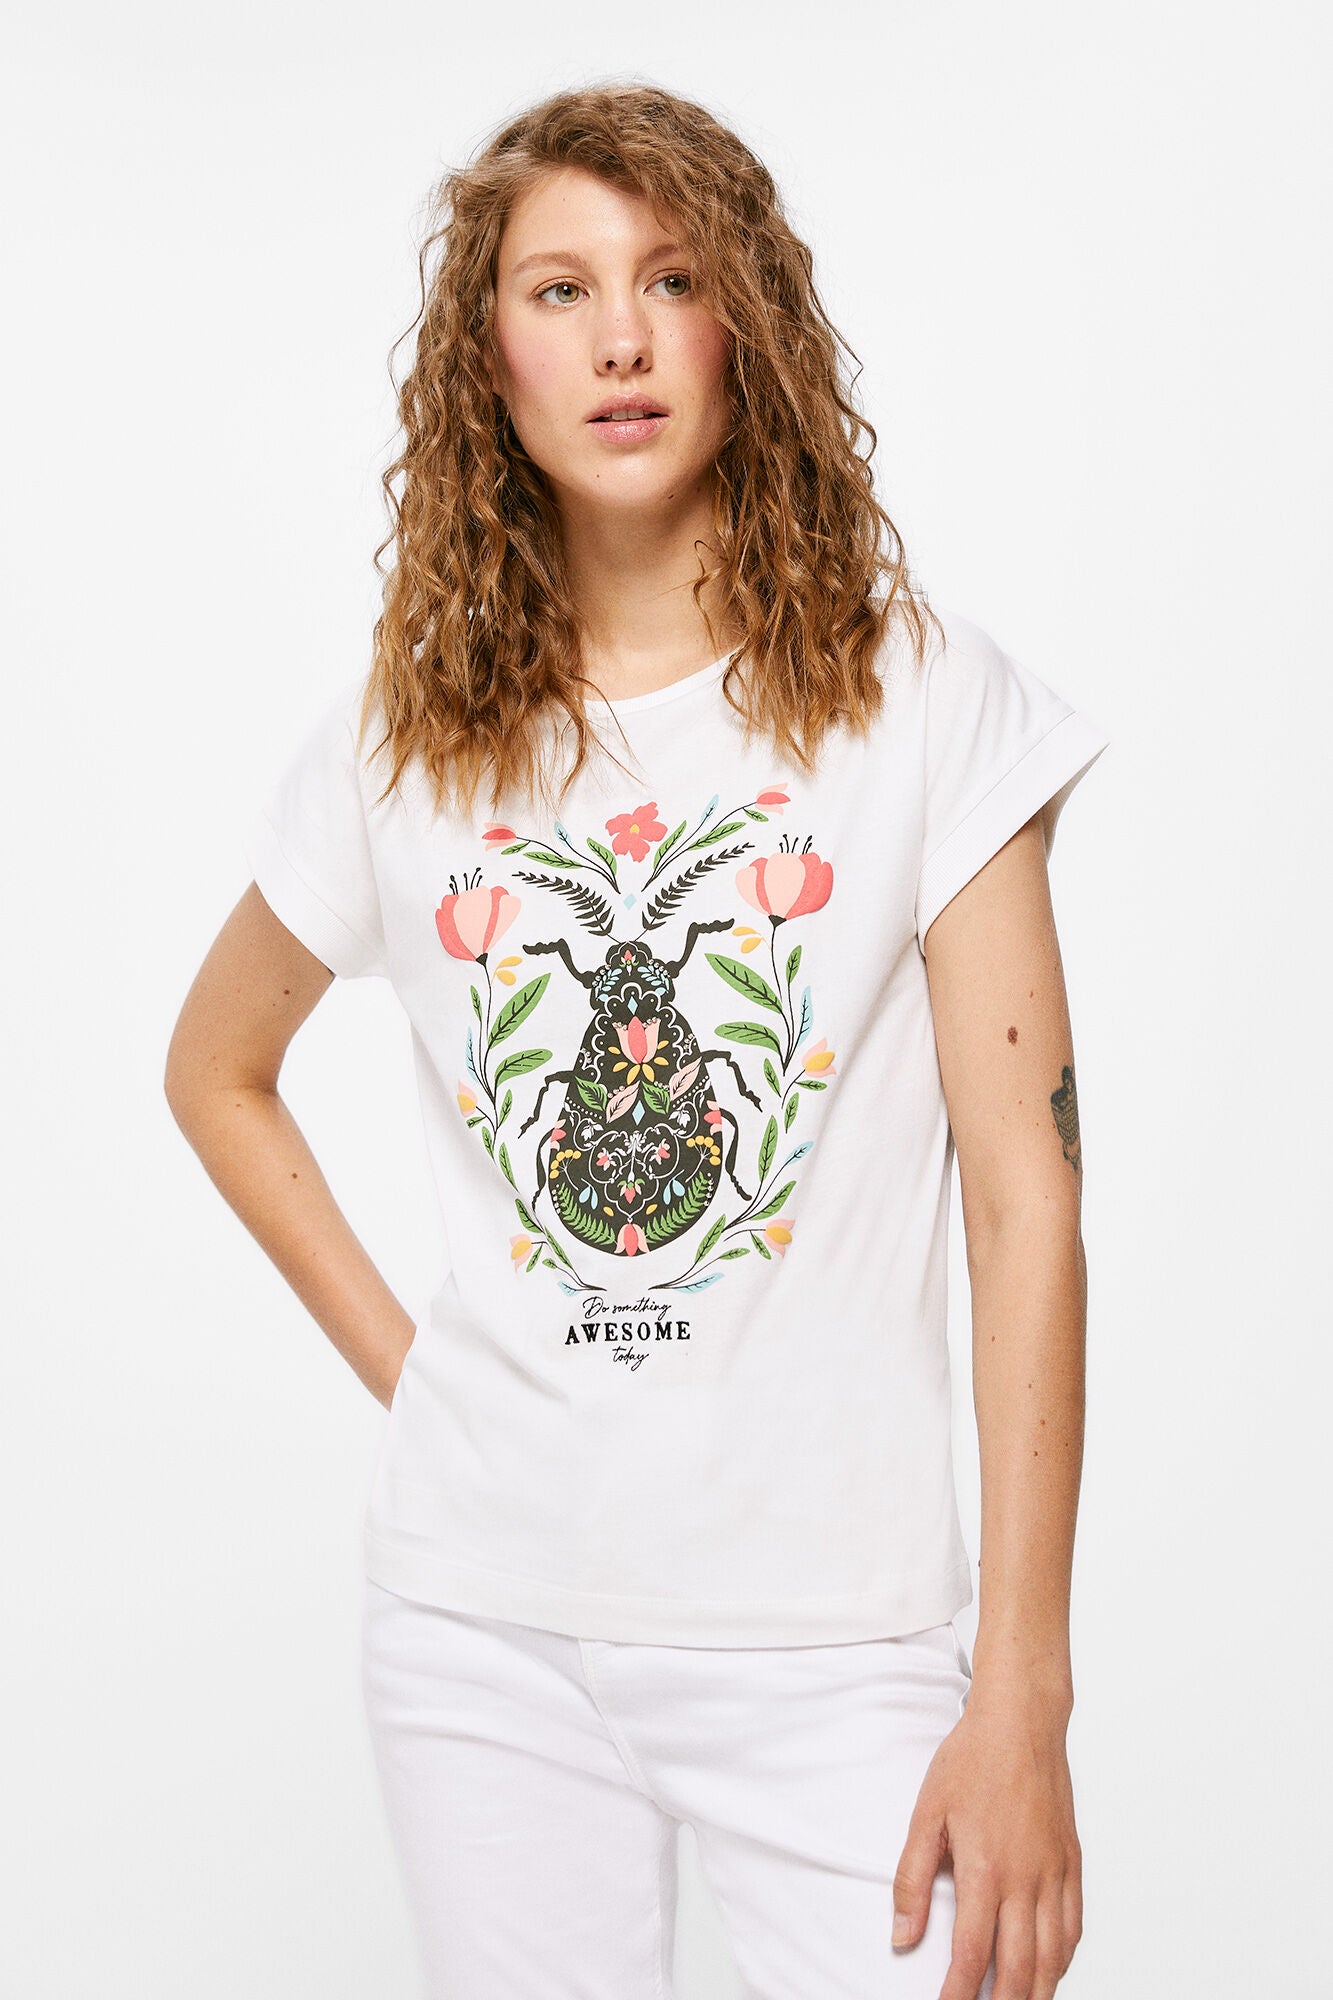 Insect graphic T-shirt